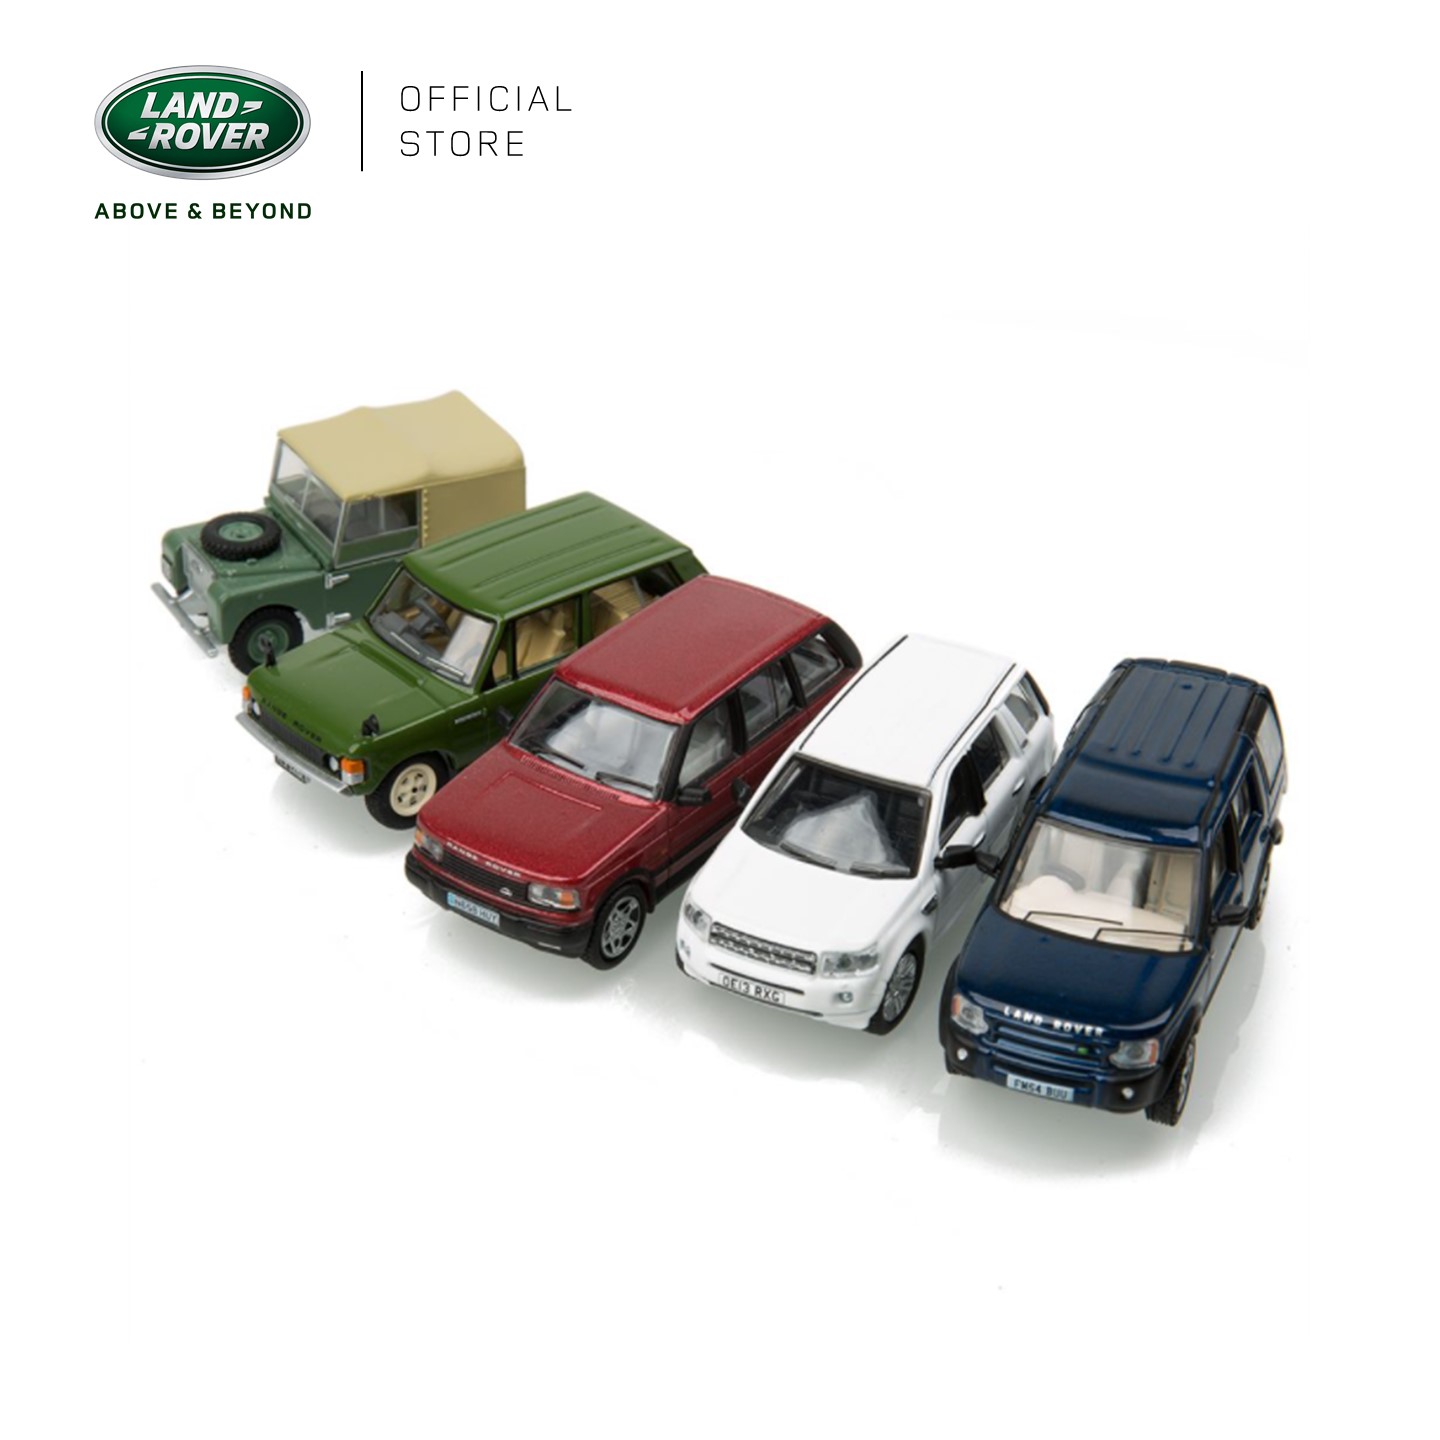 LAND ROVER CLASSIC 5 PIECE SET 1:76 SCALE MODEL